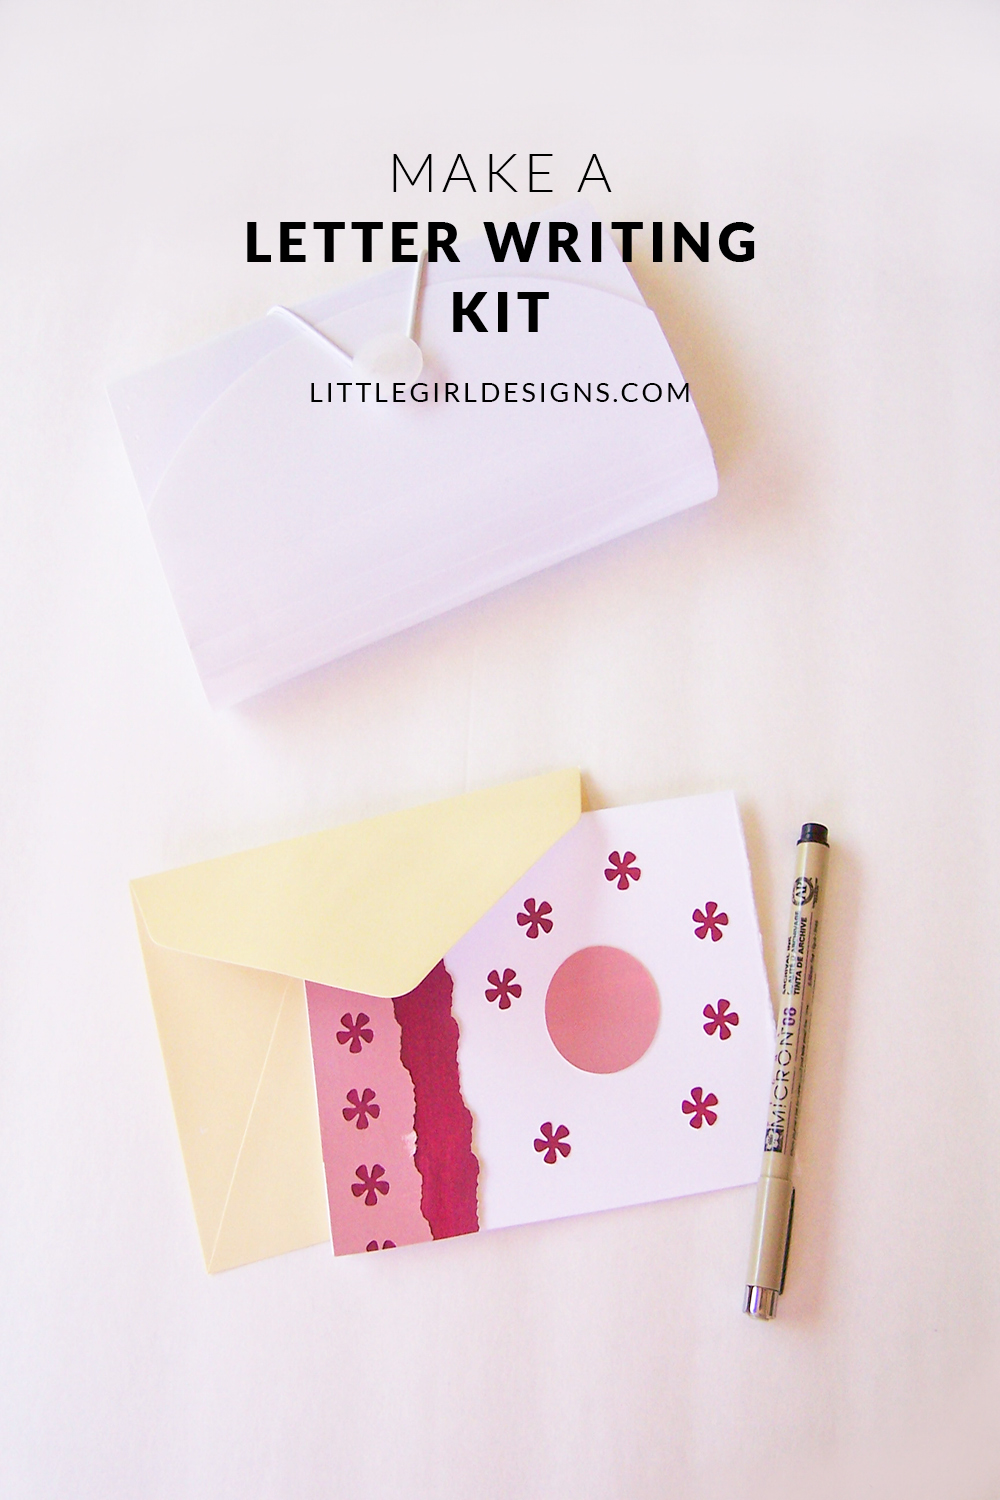 How to make a portable letter writing kit - This kit is just what you need if you'd like to write more letters! Ellen Russel from createinthechaos.com shares her letter writing kit and how you can make one too! @littlegirldesigns.com